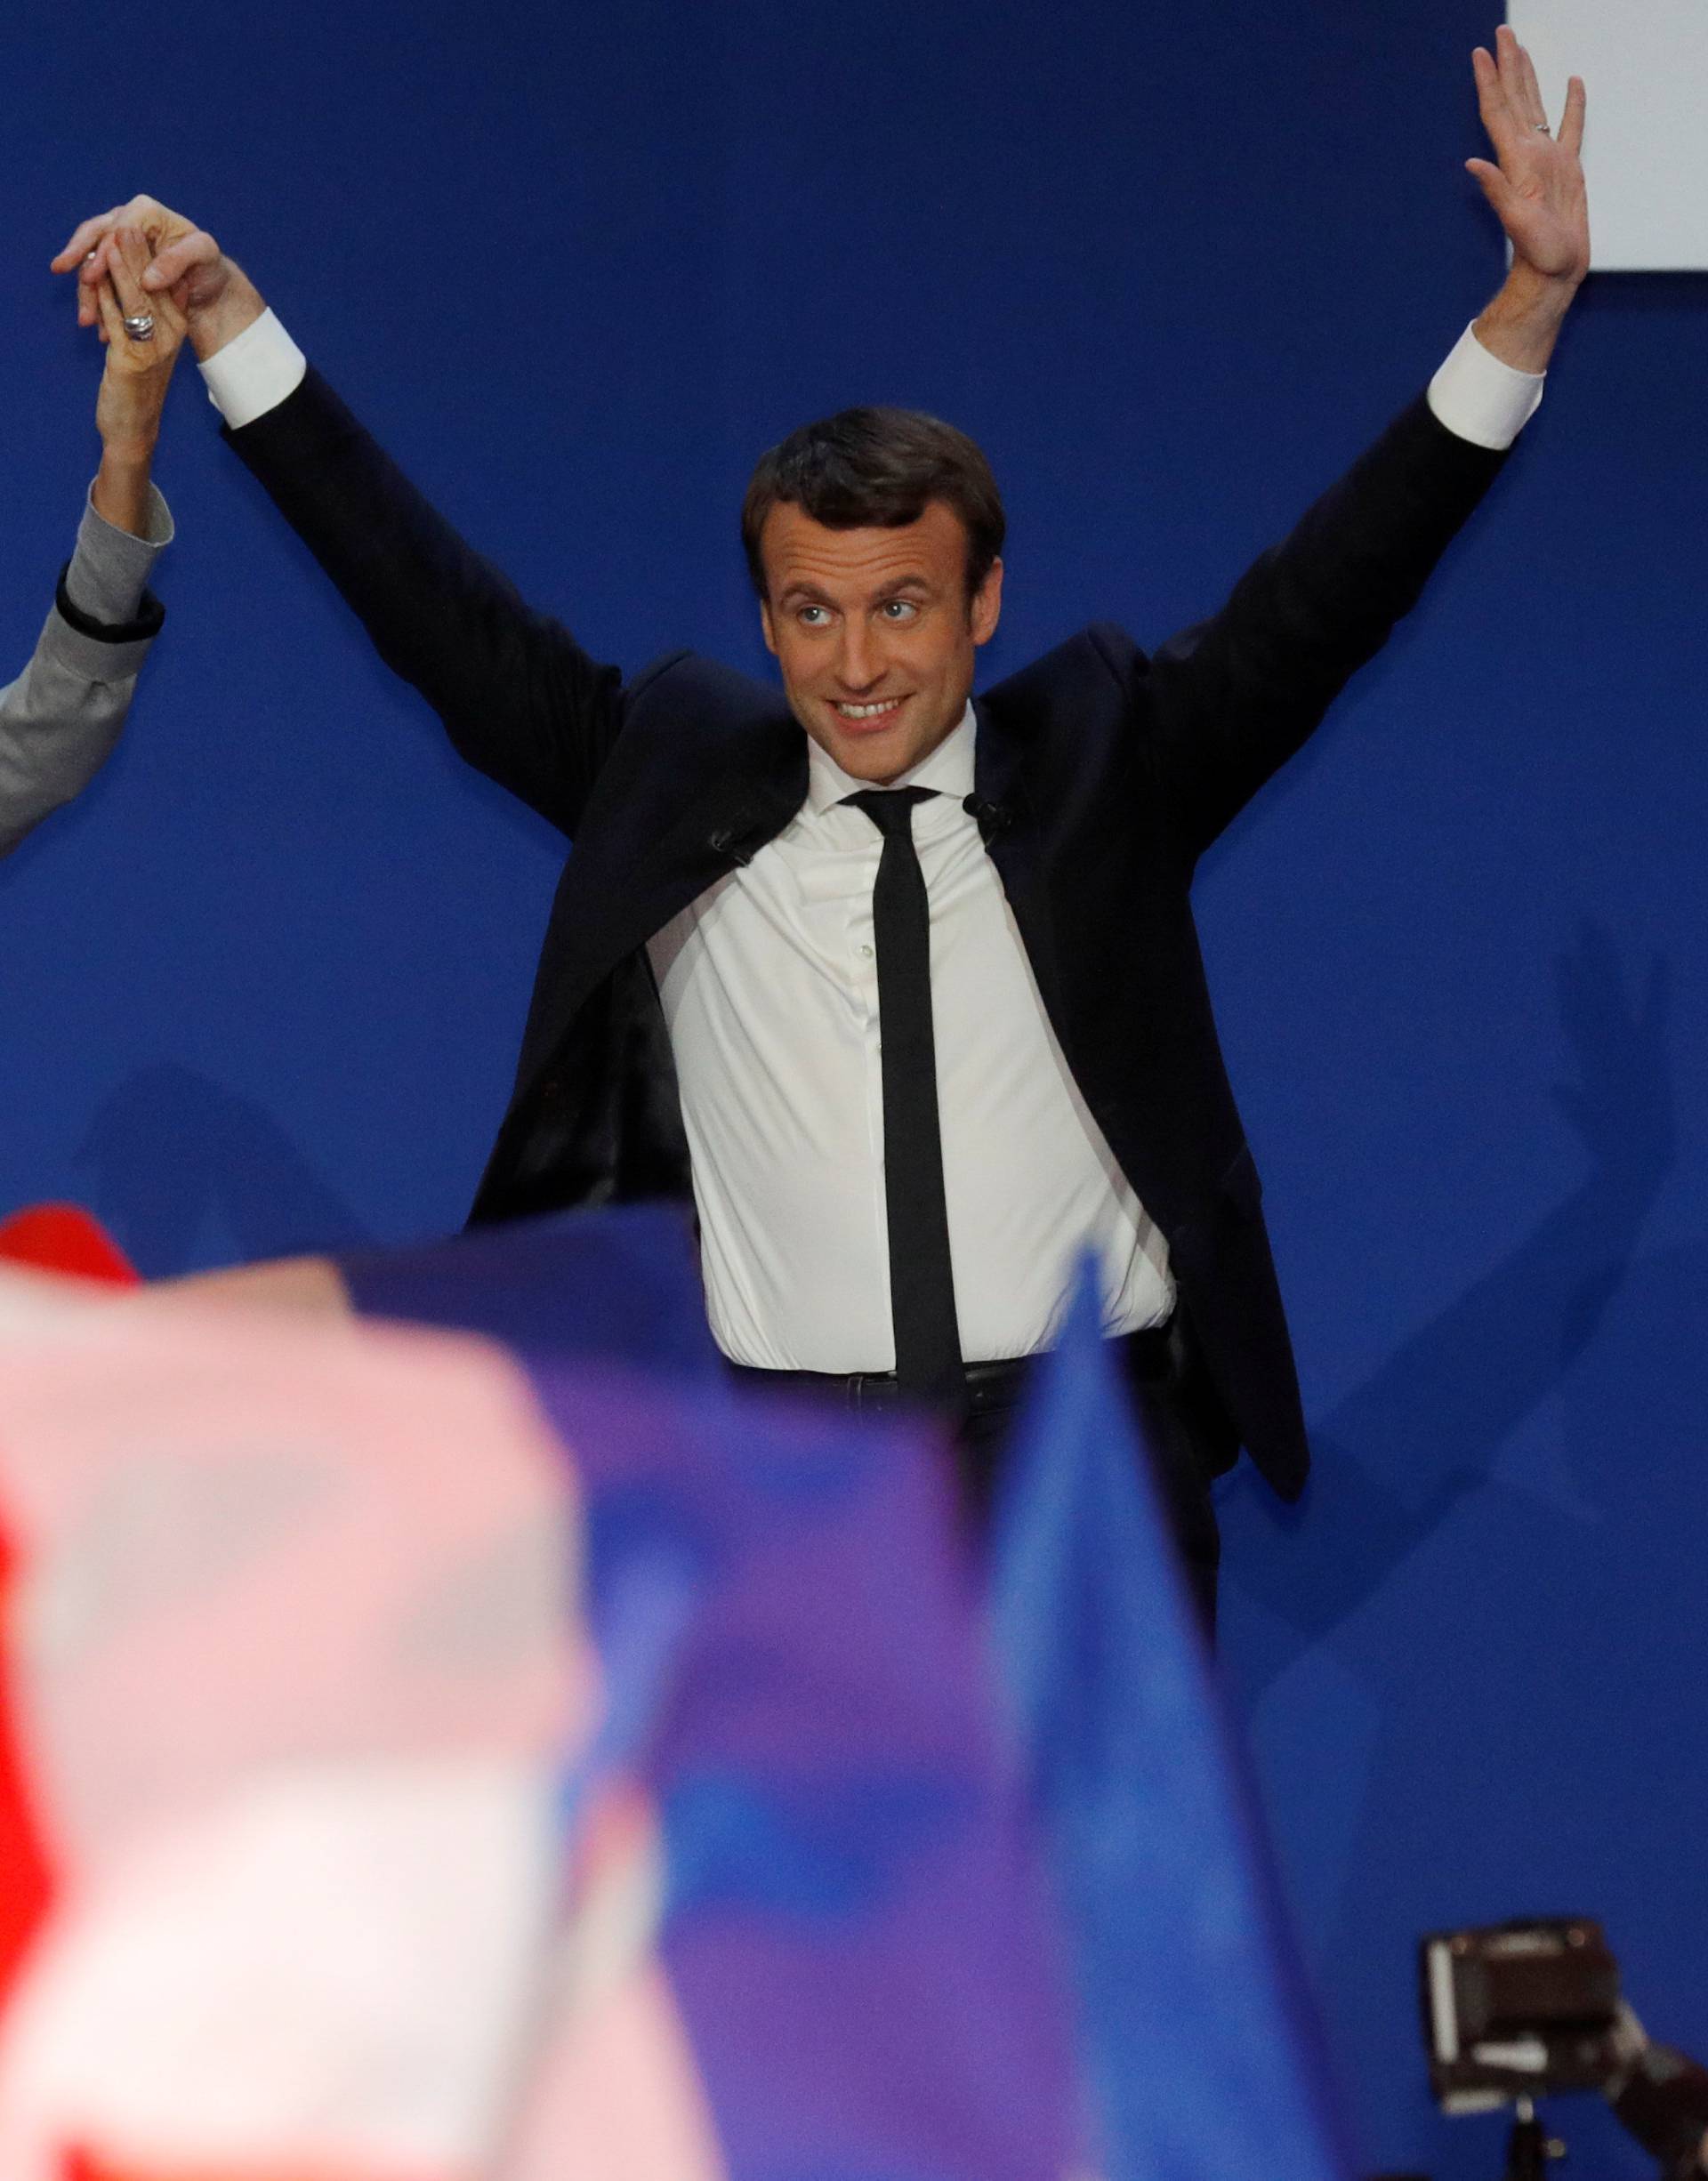 Emmanuel Macron, head of the political movement En Marche !, or Onwards !, and candidate for the 2017 French presidential election, arrives with his wife Brigitte Trogneux to deliver a speech at the Parc des Expositions hall in Paris